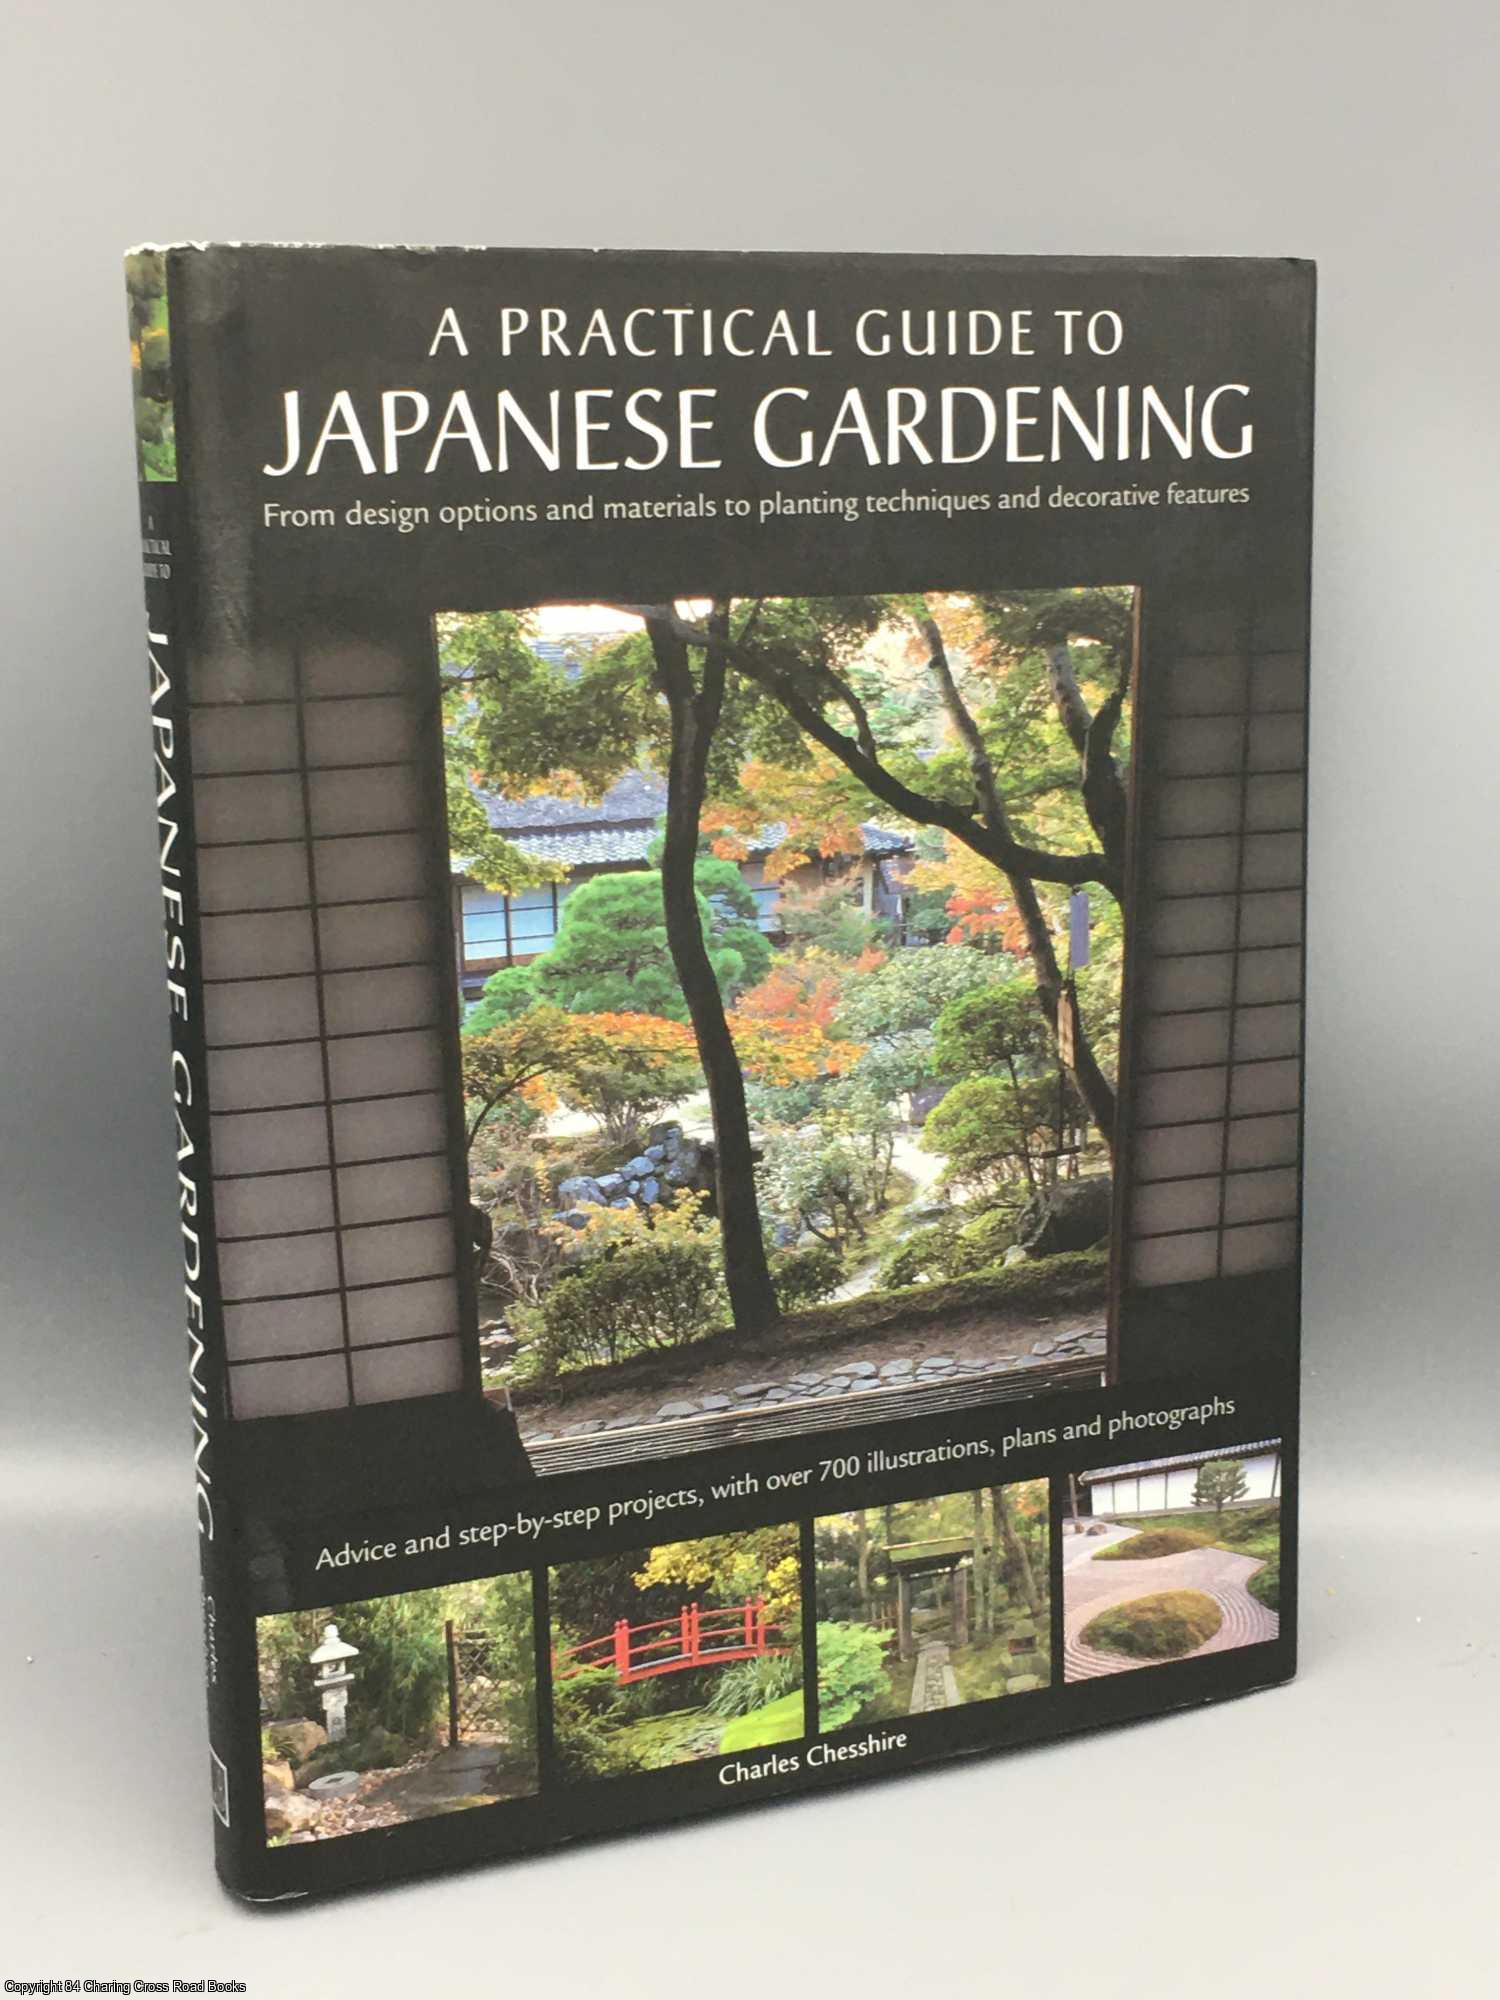 Chesshire, Charles - A Practical Guide to Japanese Gardening: An Inspirational and Practical Guide to Creating the Japanese Garden Style, from Design Options and Materials to Planting Techniques and Decorative Features